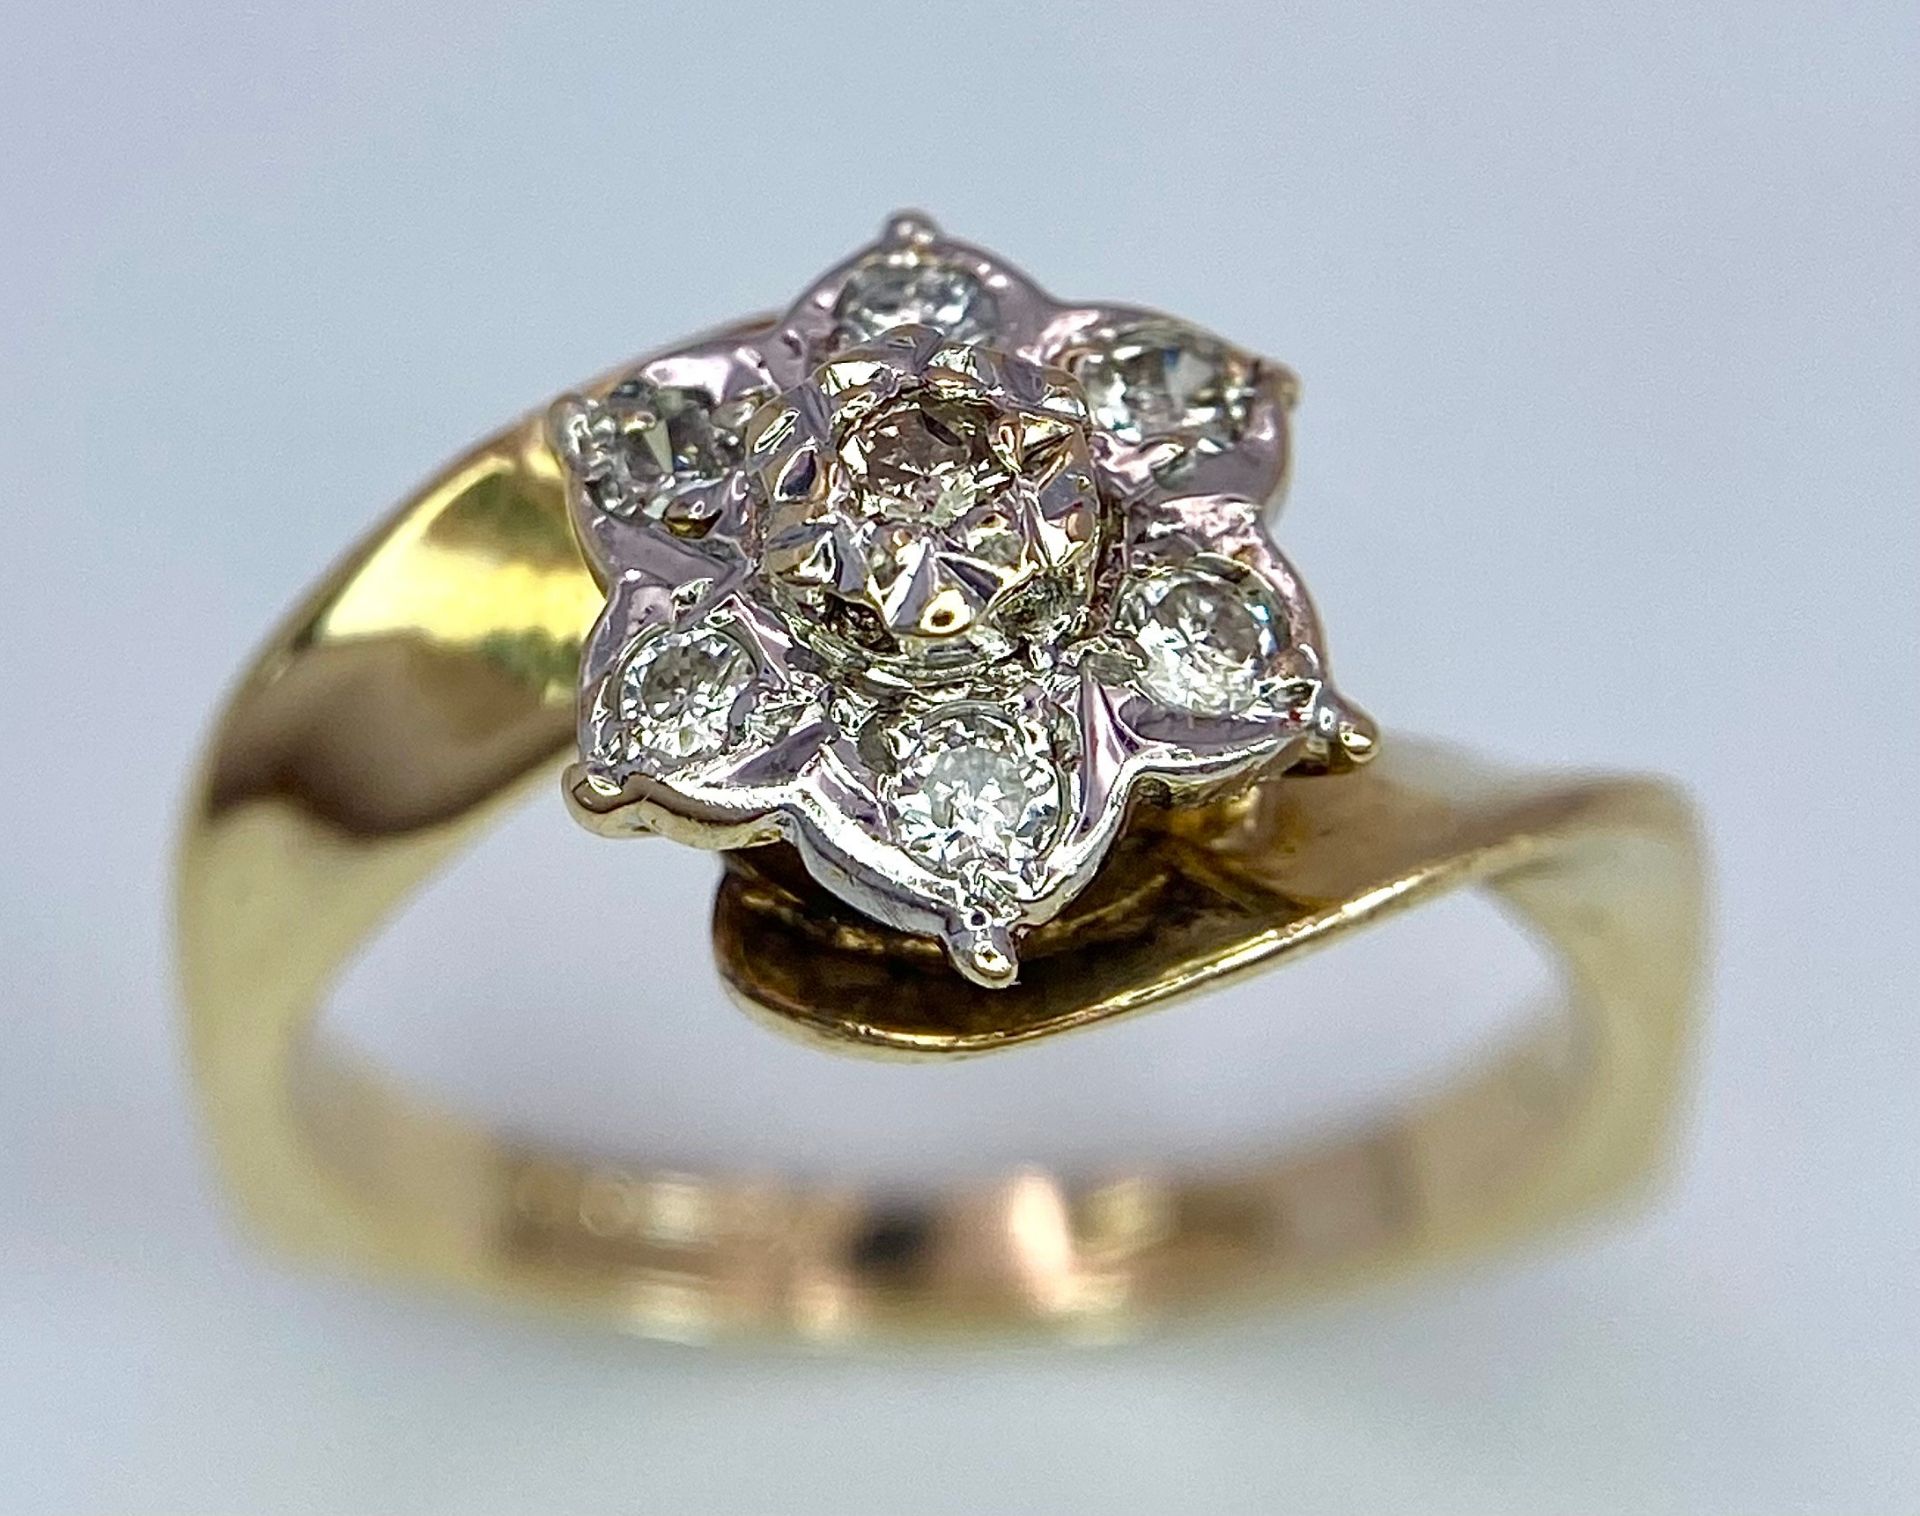 A 9K YELLOW GOLD DIAMOND FANCY VINTAGE CLUSTER RING. Size L, 2.7g total weight. Ref: SC 9008 - Image 3 of 7